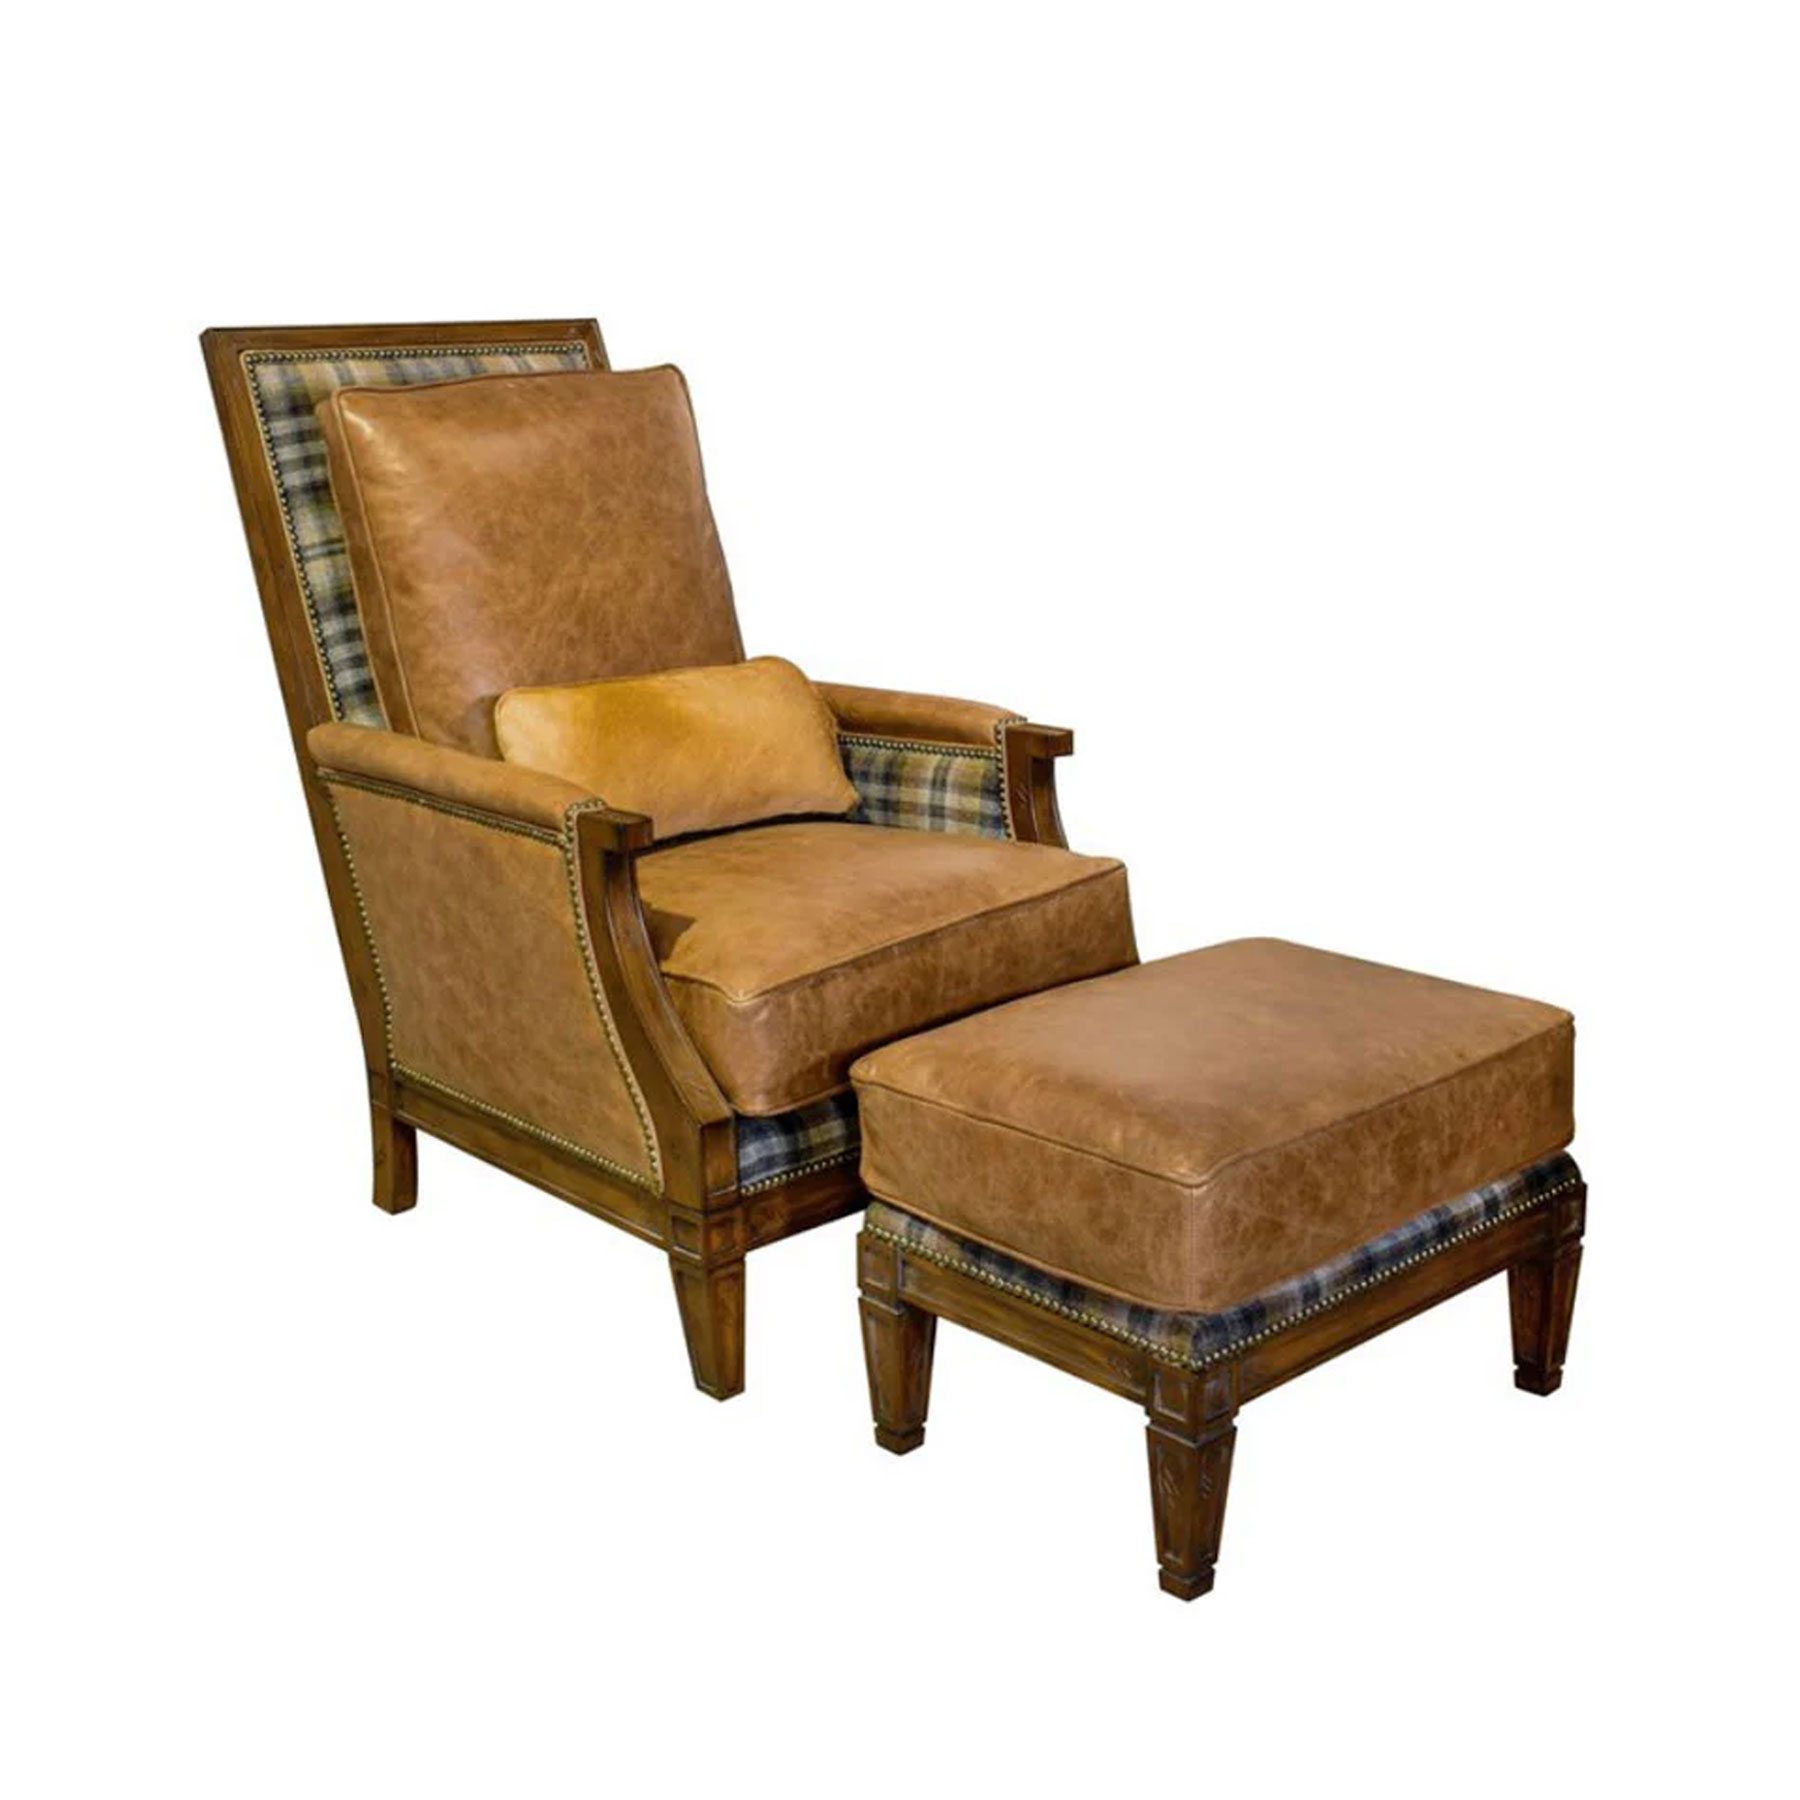 Our House 882 San Baranto Tall Back Chair and Ottoman in Leather